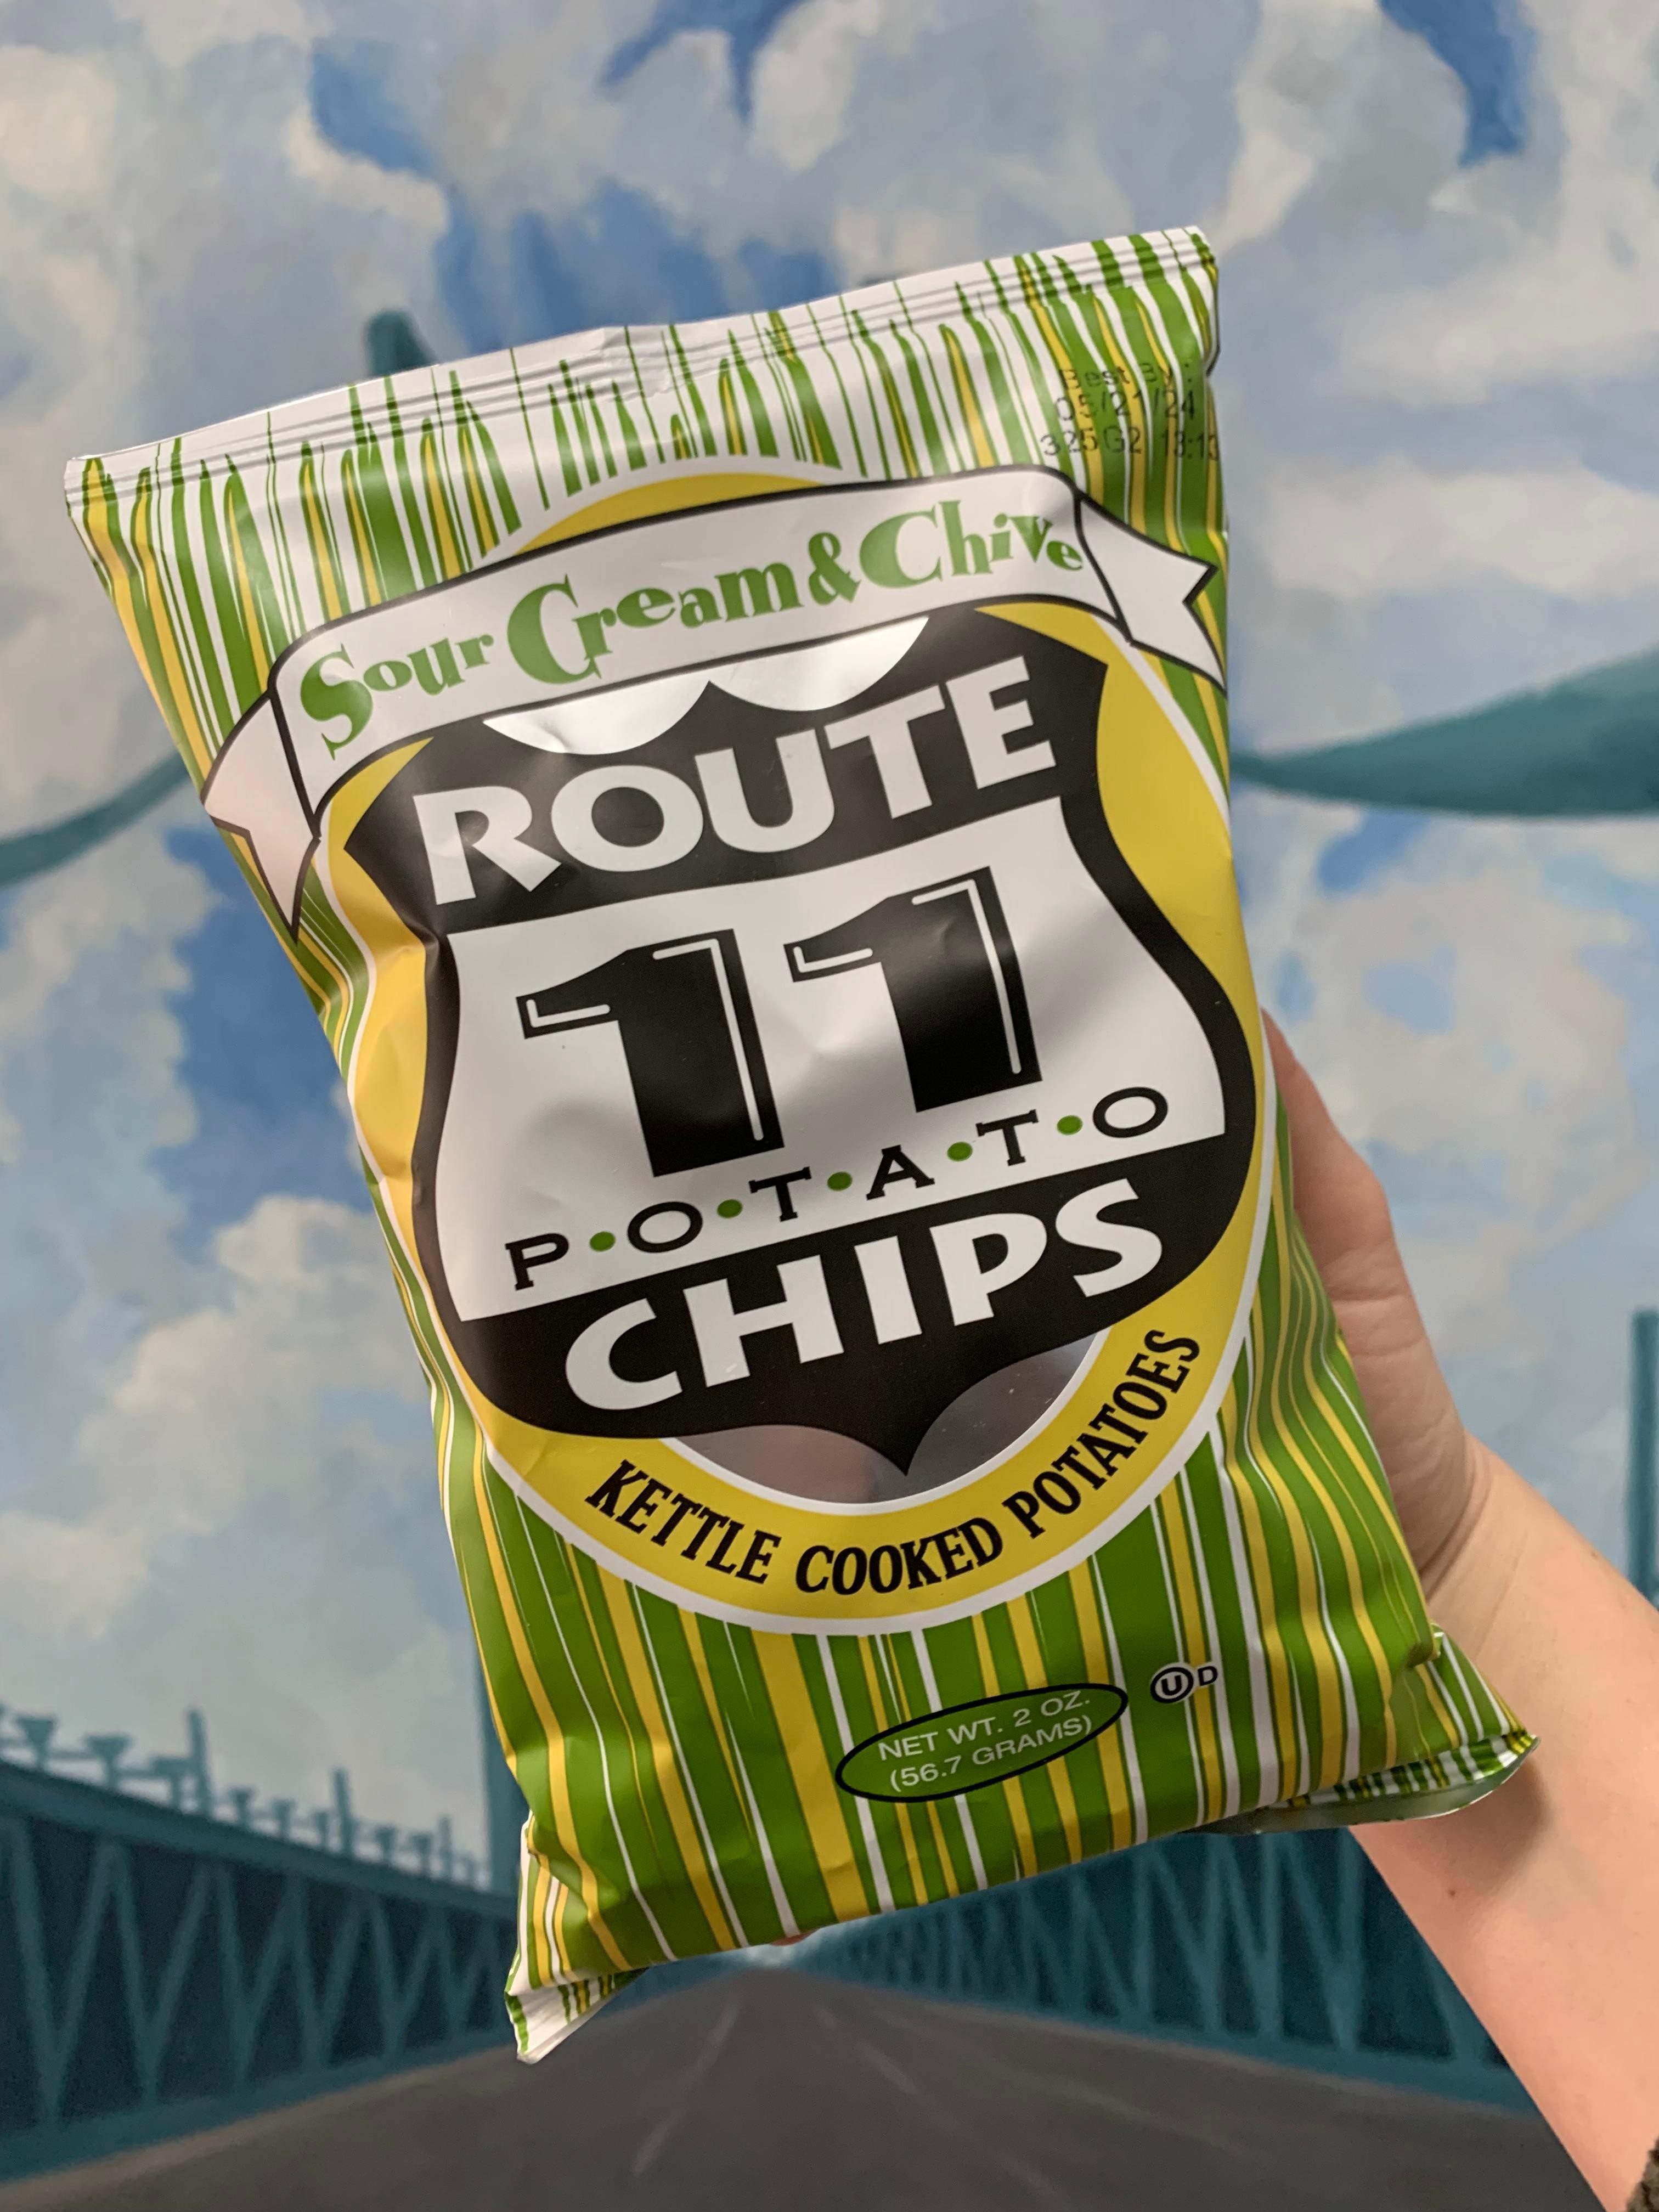 Sour Cream and Chive Route 11 Chips